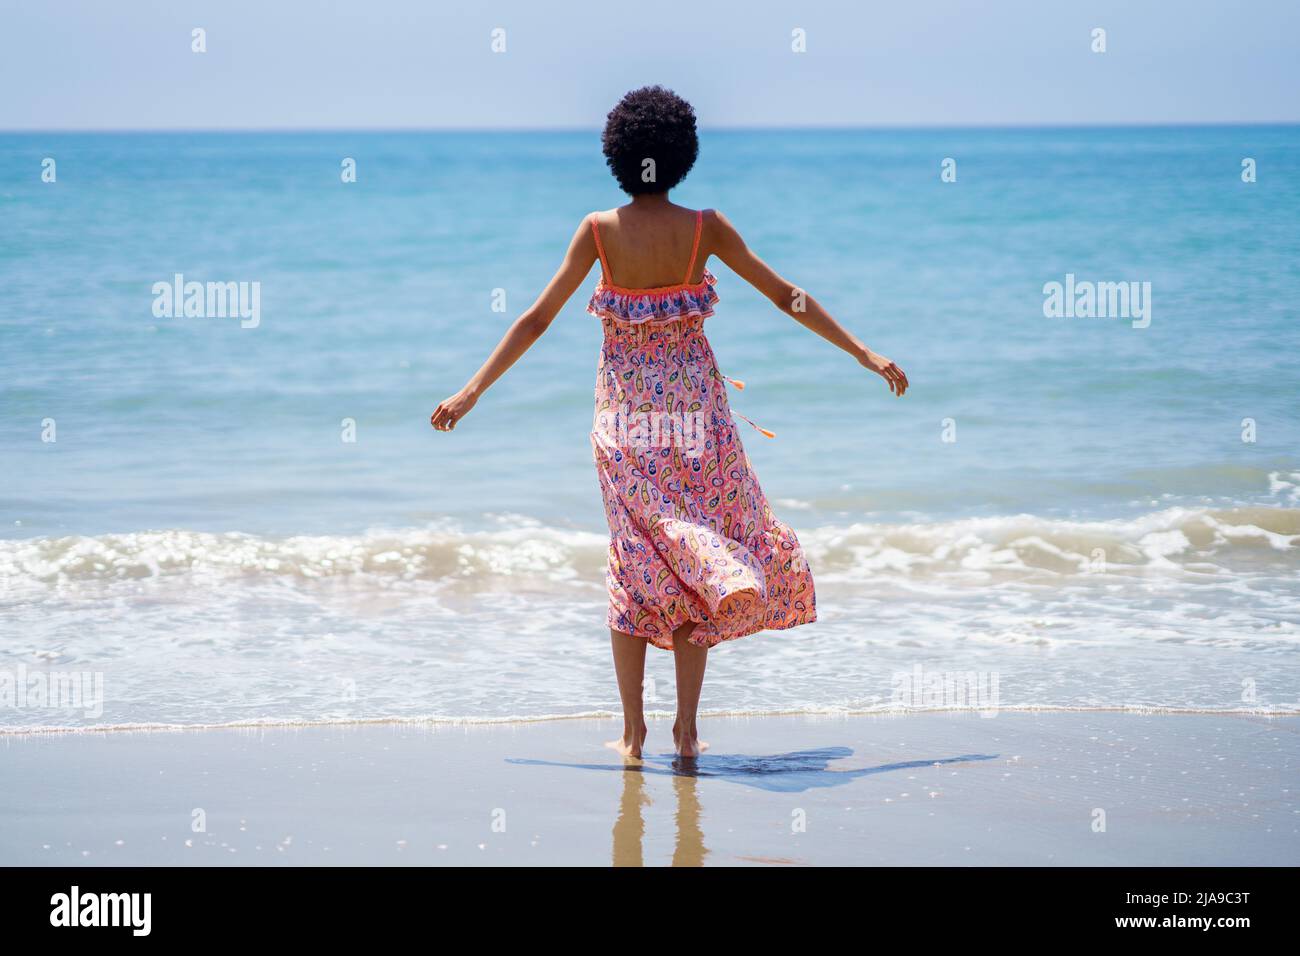 Rear view of black woman with afro hair in summer dress, opening her arms looking out to sea. Stock Photo